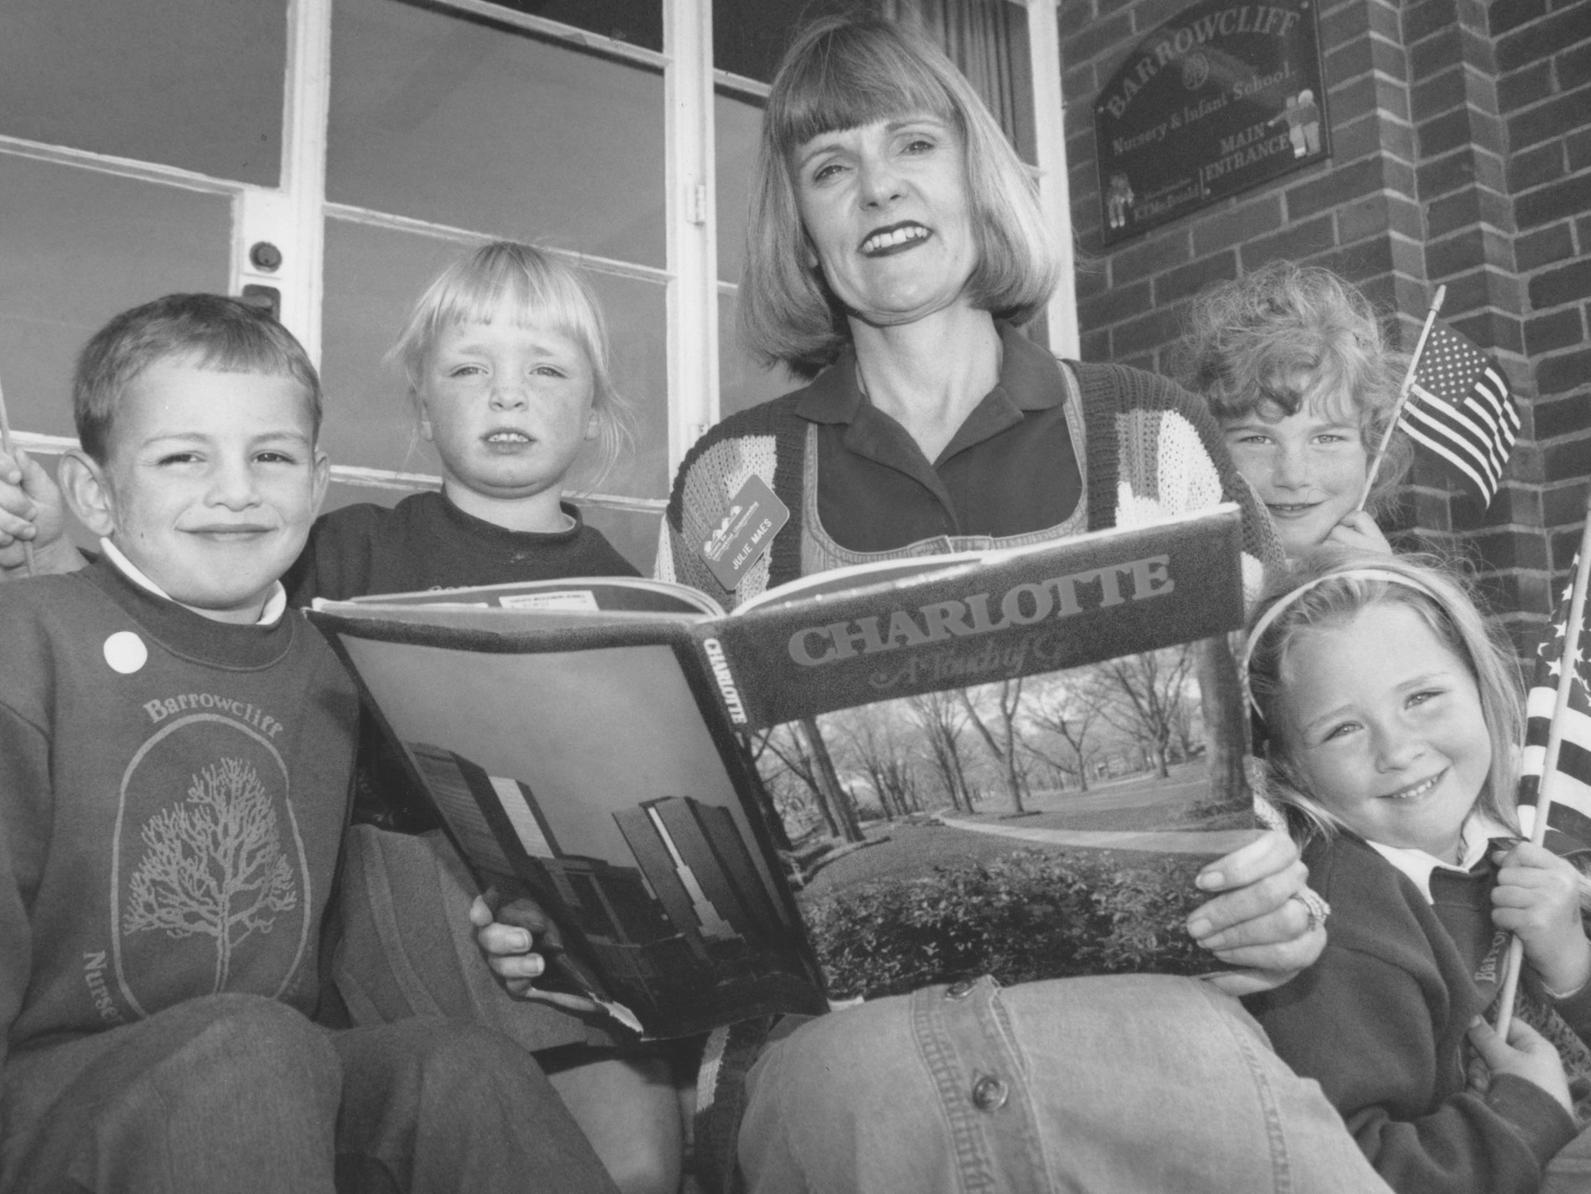 Visiting American teacher Julie Mews said a fond farewell to some of the Barrowcliff Infants School children that she had met during her visit in June 1995. Pictured, left to right, Charlie Clapham, Rachel Pickup, Georgina Foden, Katie Taylor.